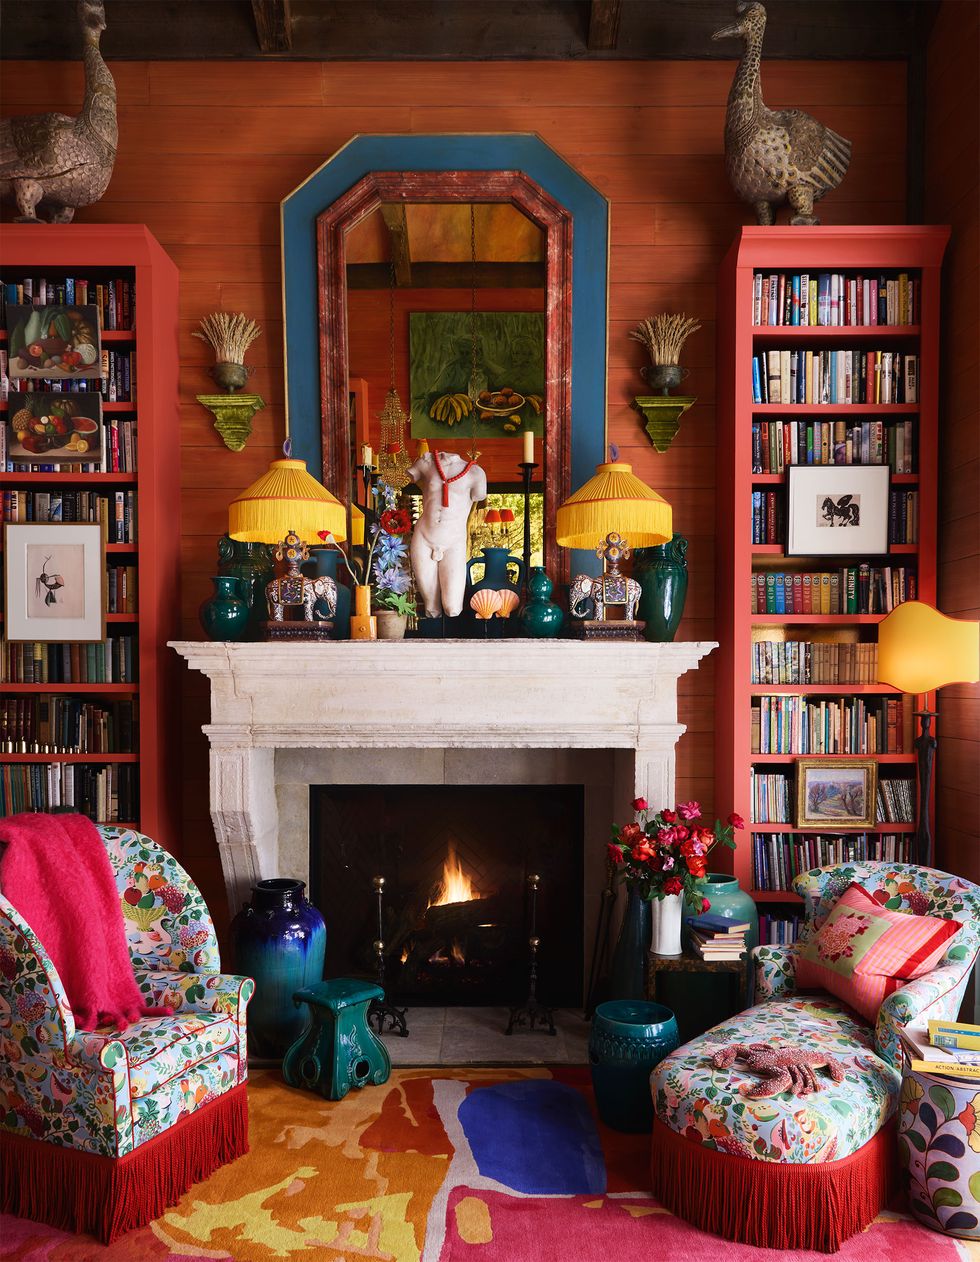 terracotta colored walls, bookshelves flank a fireplace with a mirror, objects, and lamps on mantel, stools and side tables, colorful upholstered armchair and chaise longue, multicolored abstract patterned rug